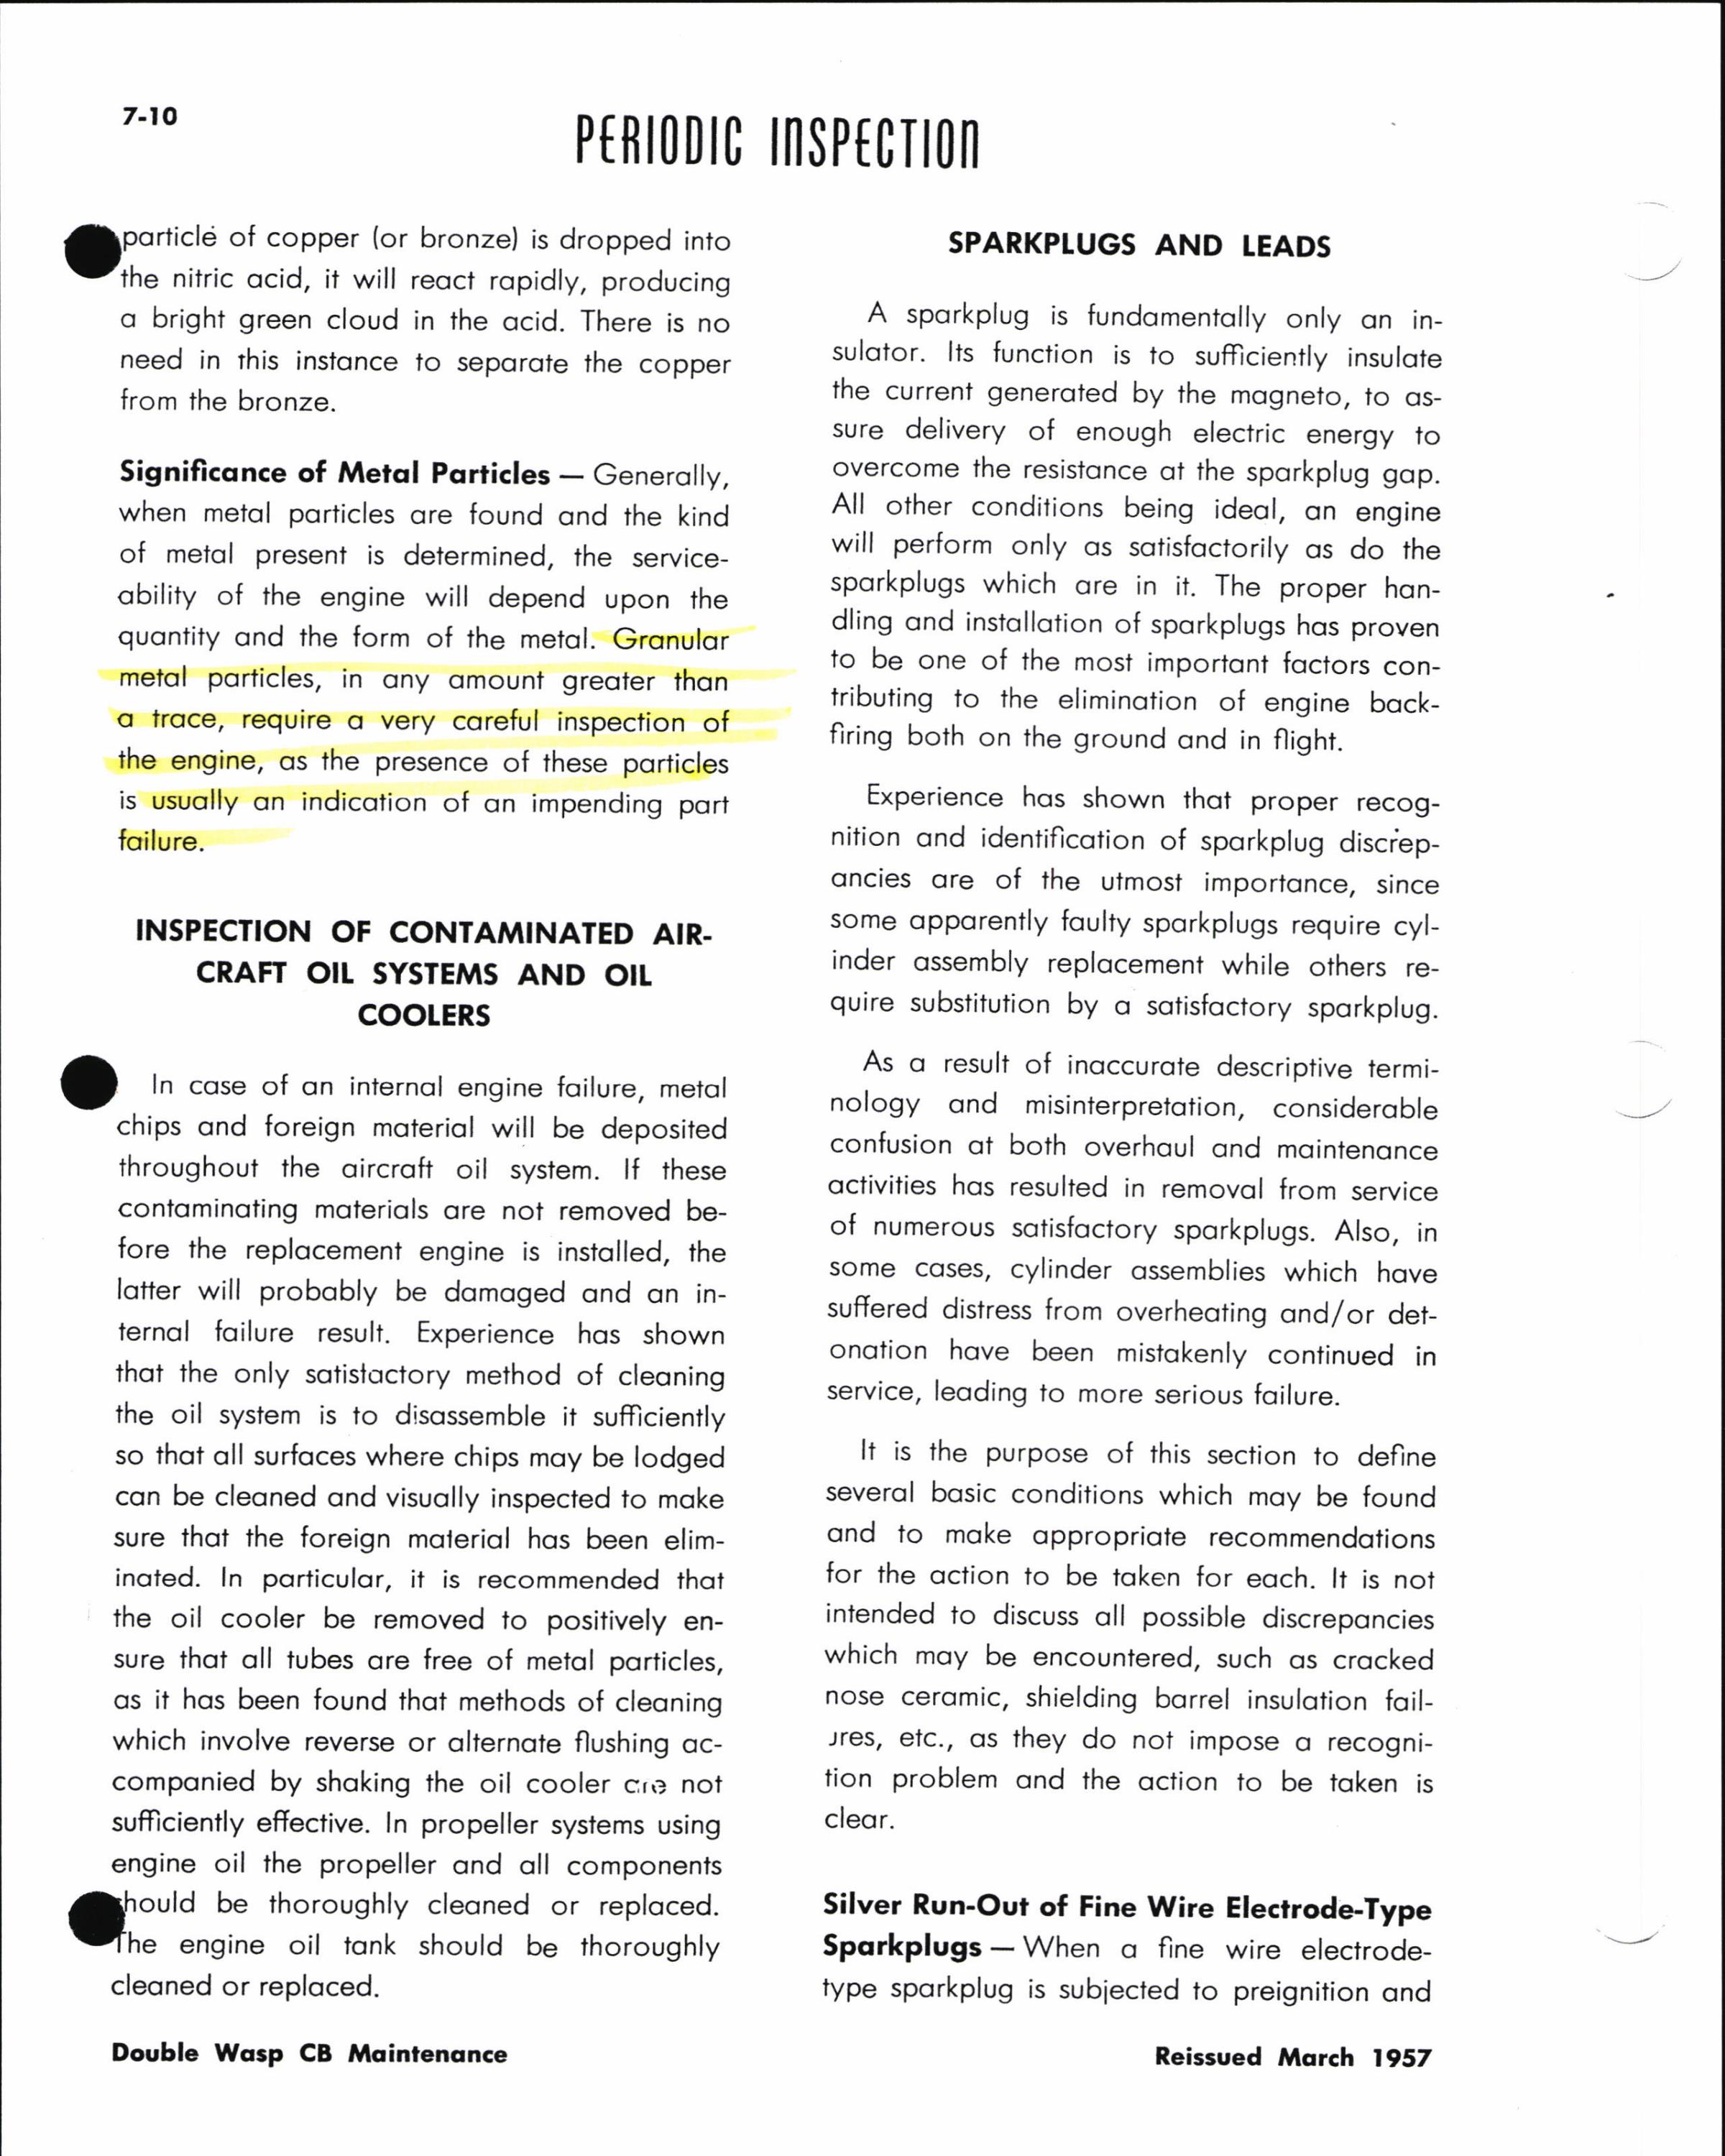 Sample page 2 from AirCorps Library document: Periodic Inspection for Double Wasp CB Maintenance